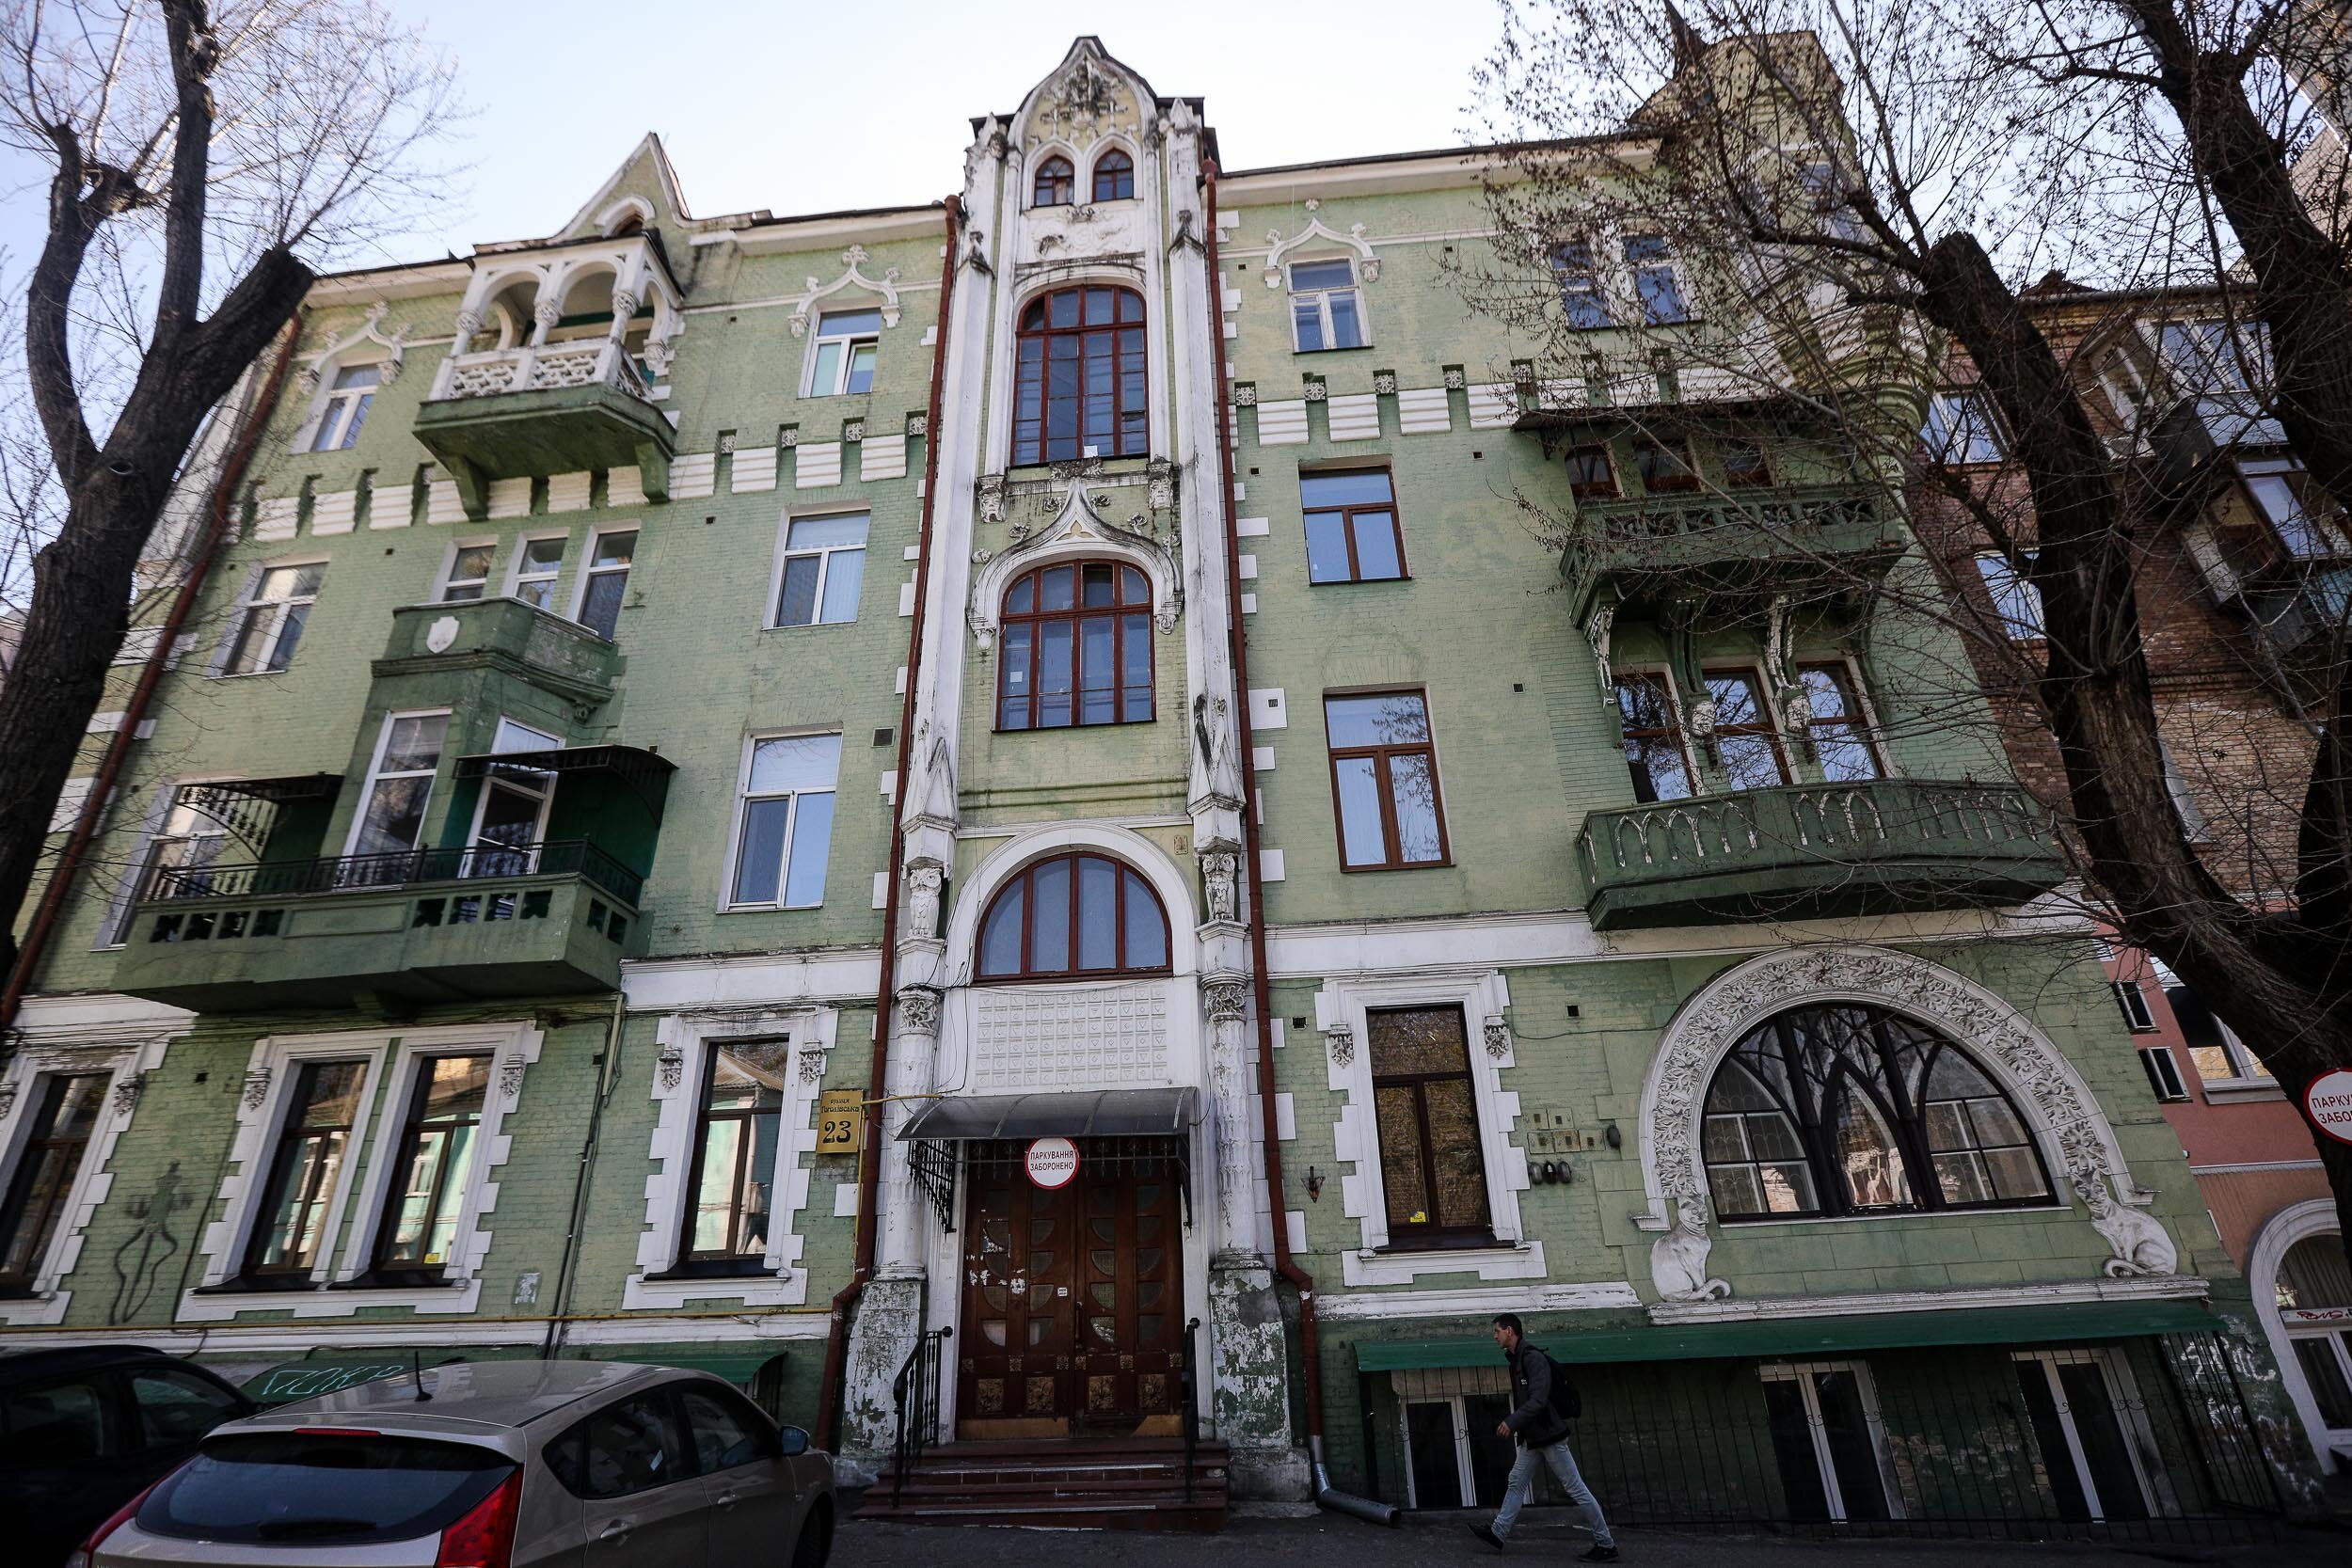 The House With Cats is located on 23 Hoholivska St. Its Art Nouveau design shows zoomorphic carvings such as owls, cats, and chimeras, attracting tourists to view the house from the outside. 